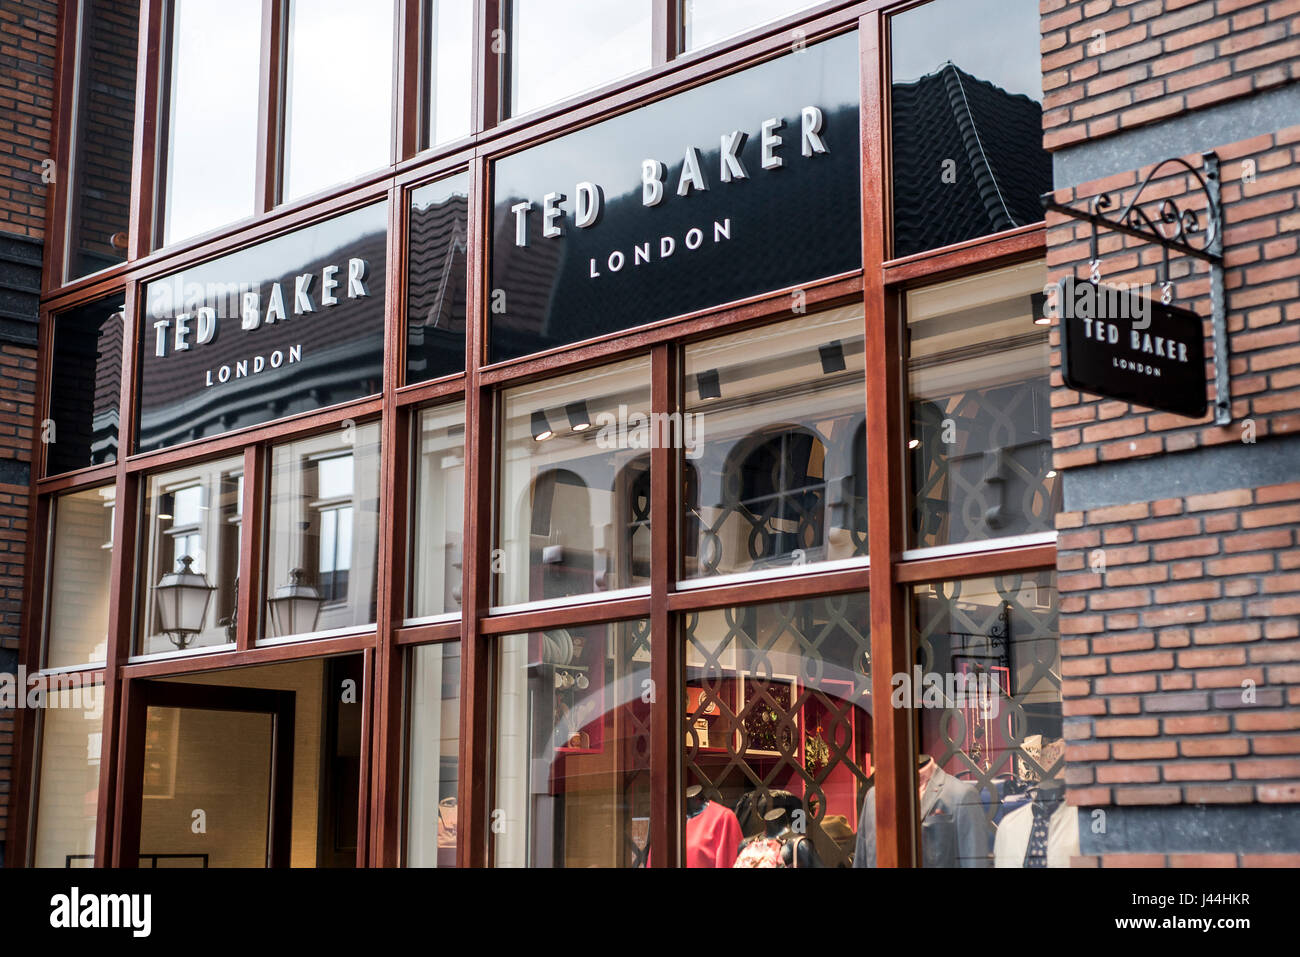 Ted Baker Shop High Resolution Stock Photography and Images - Alamy